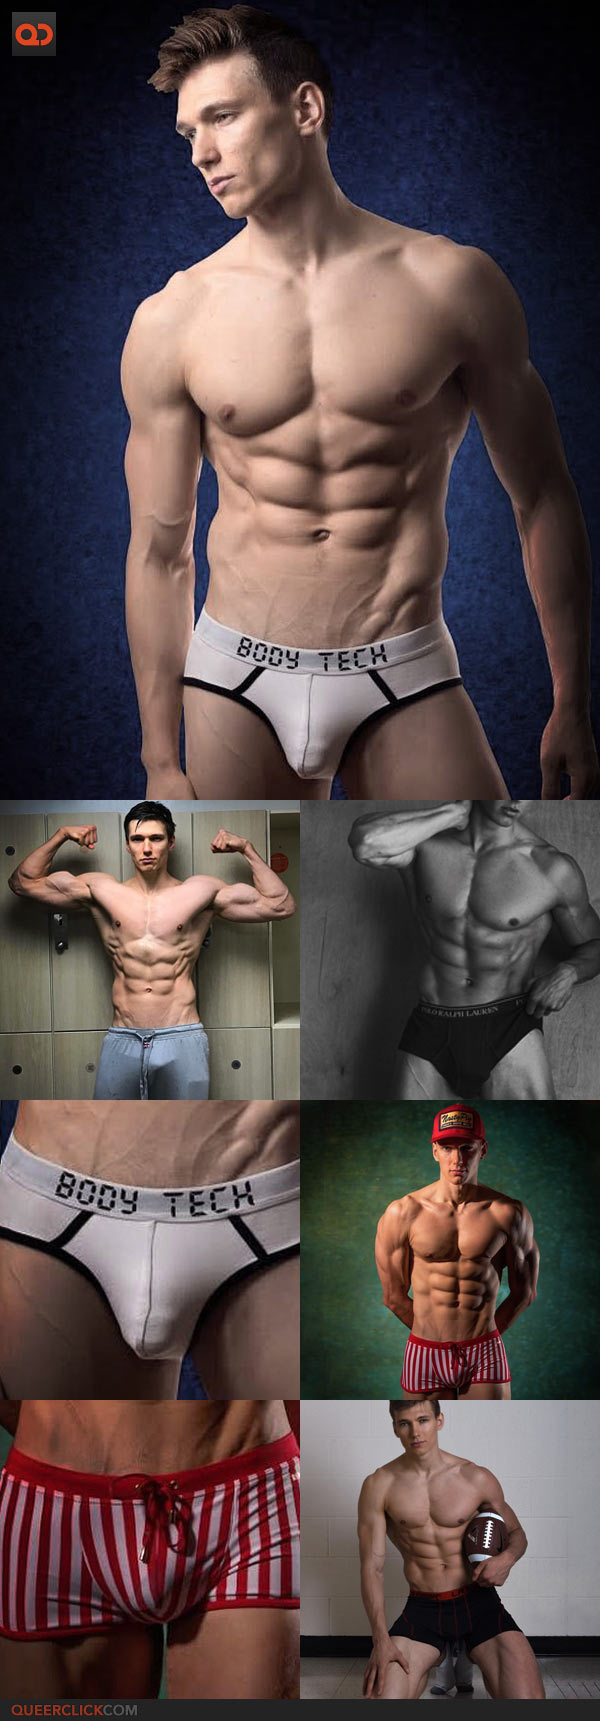 Nine BULGEtastic Fitness Models You Need To Follow On Instagram! - Part 2